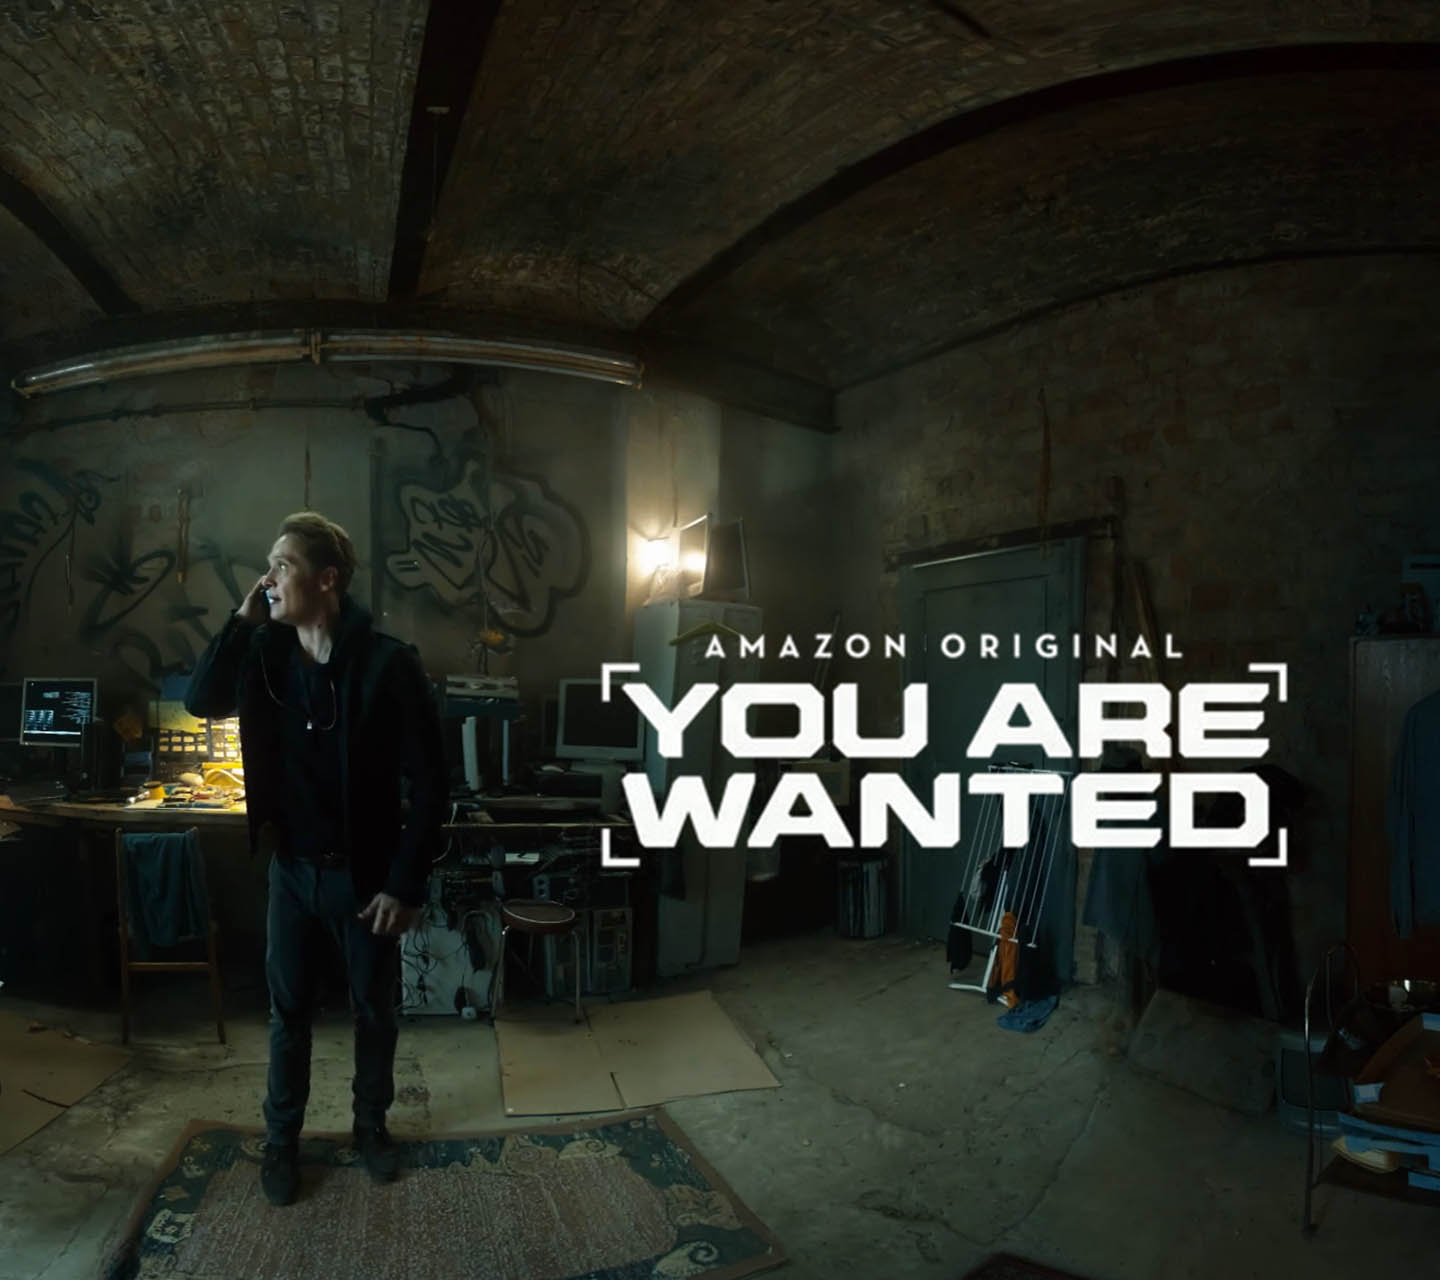 Amazon  –  You  are  wanted